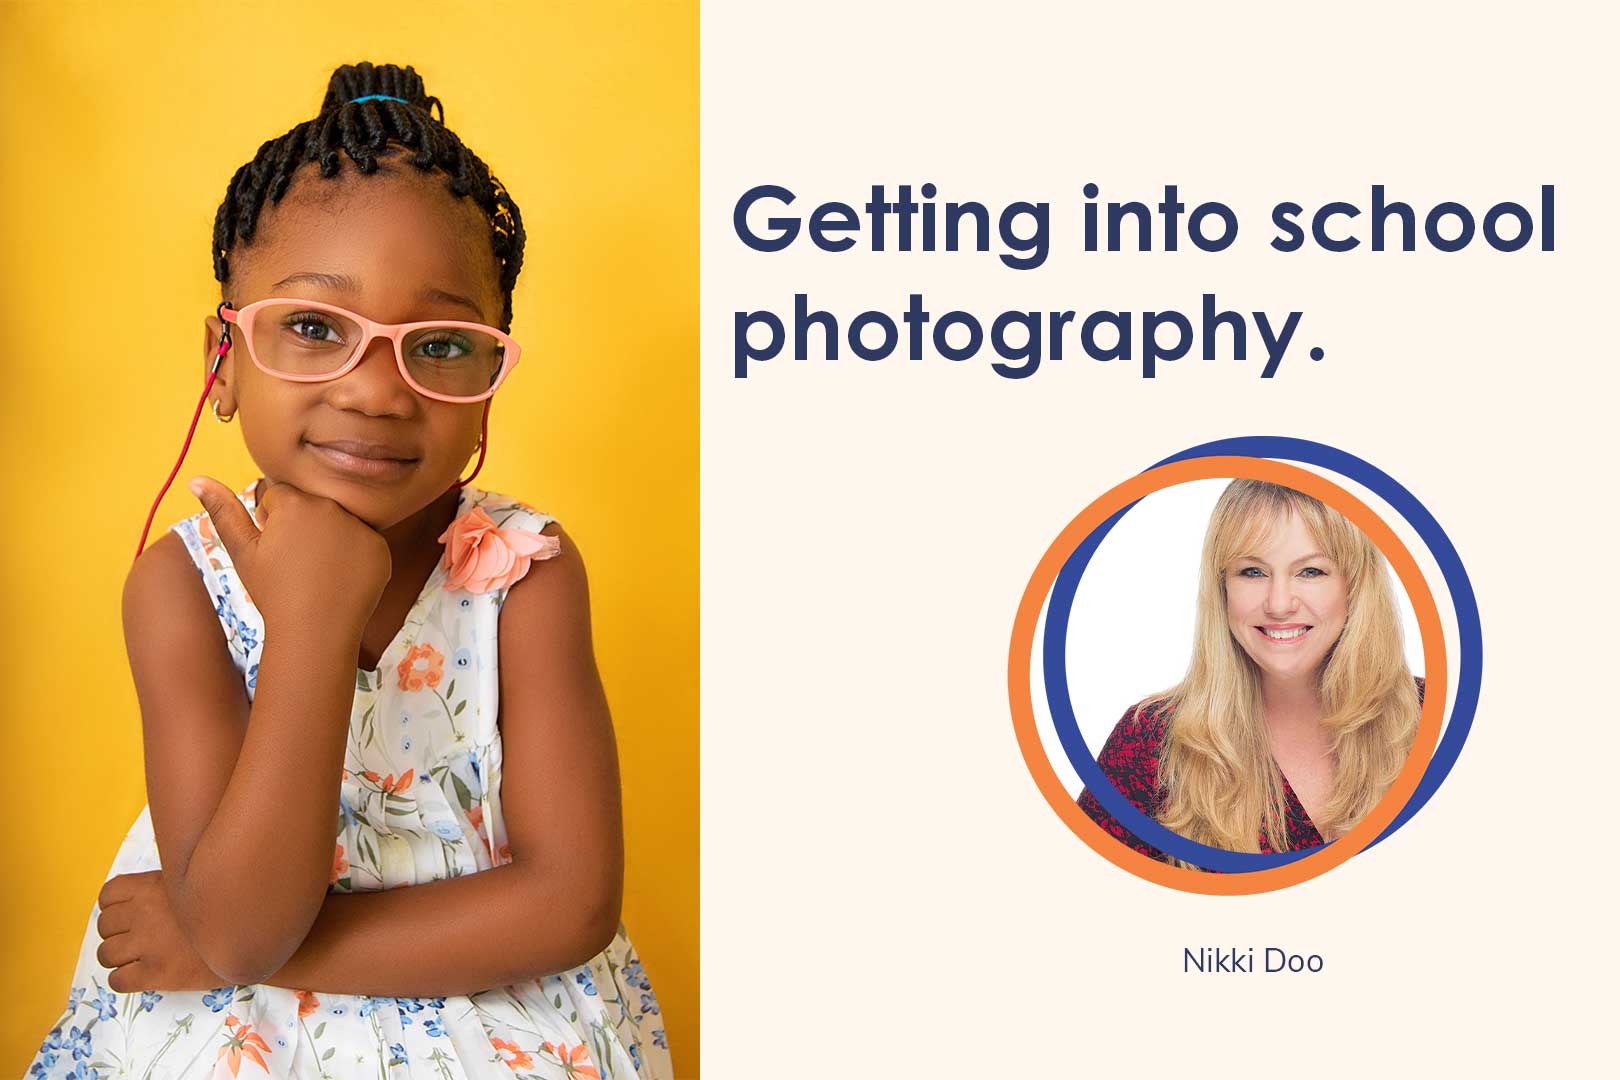 A Lesson on Getting into School Photography